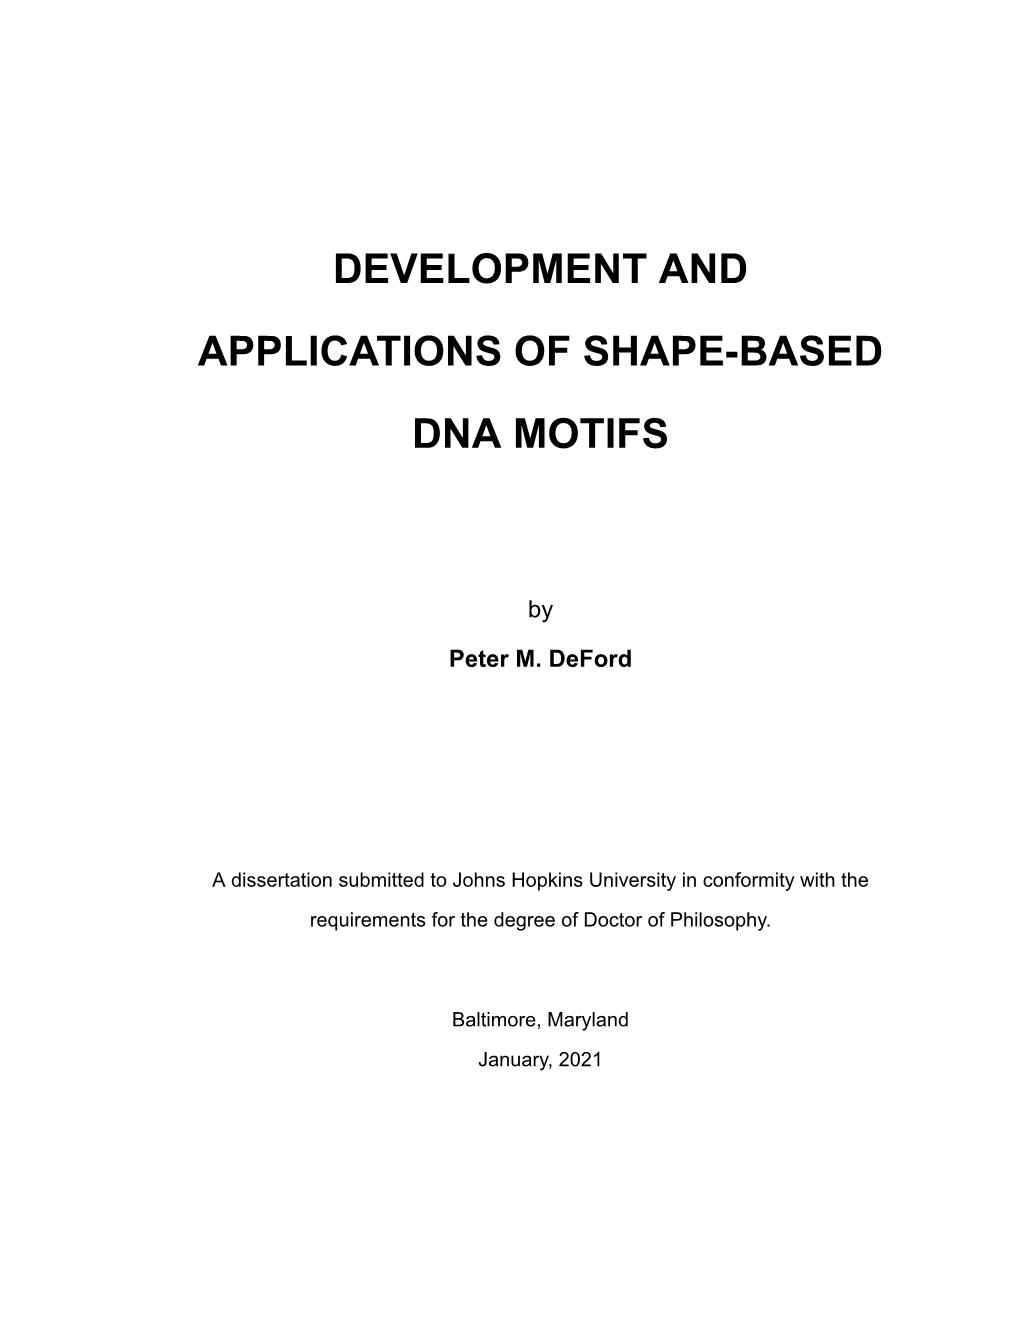 Development and Applications of Shape-Based Dna Motifs